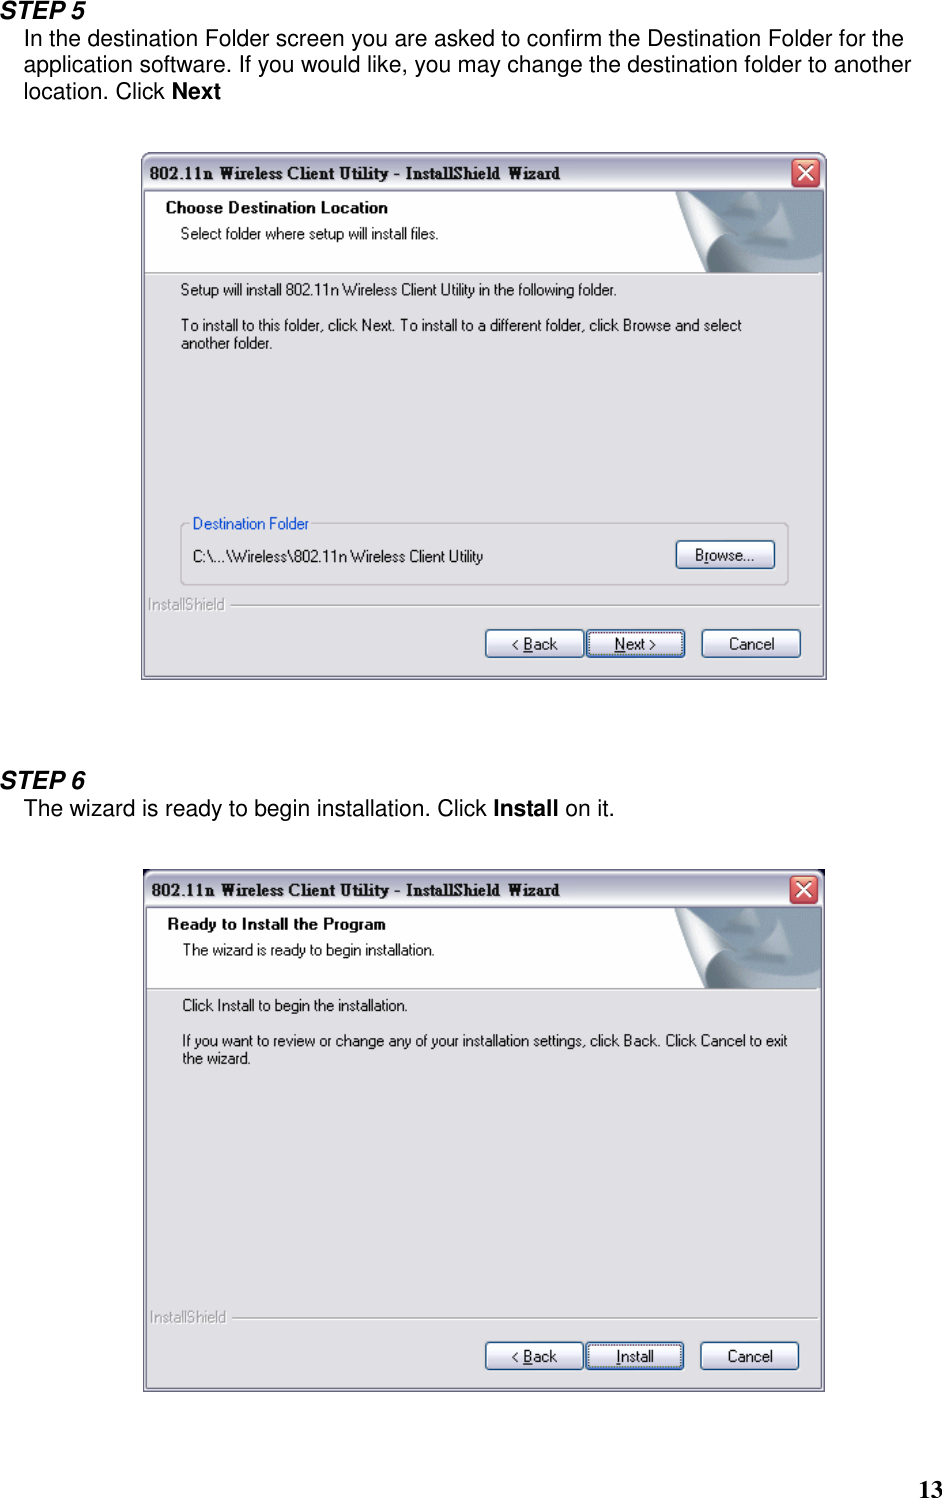  13  STEP 5 In the destination Folder screen you are asked to confirm the Destination Folder for the application software. If you would like, you may change the destination folder to another location. Click Next       STEP 6 The wizard is ready to begin installation. Click Install on it.     